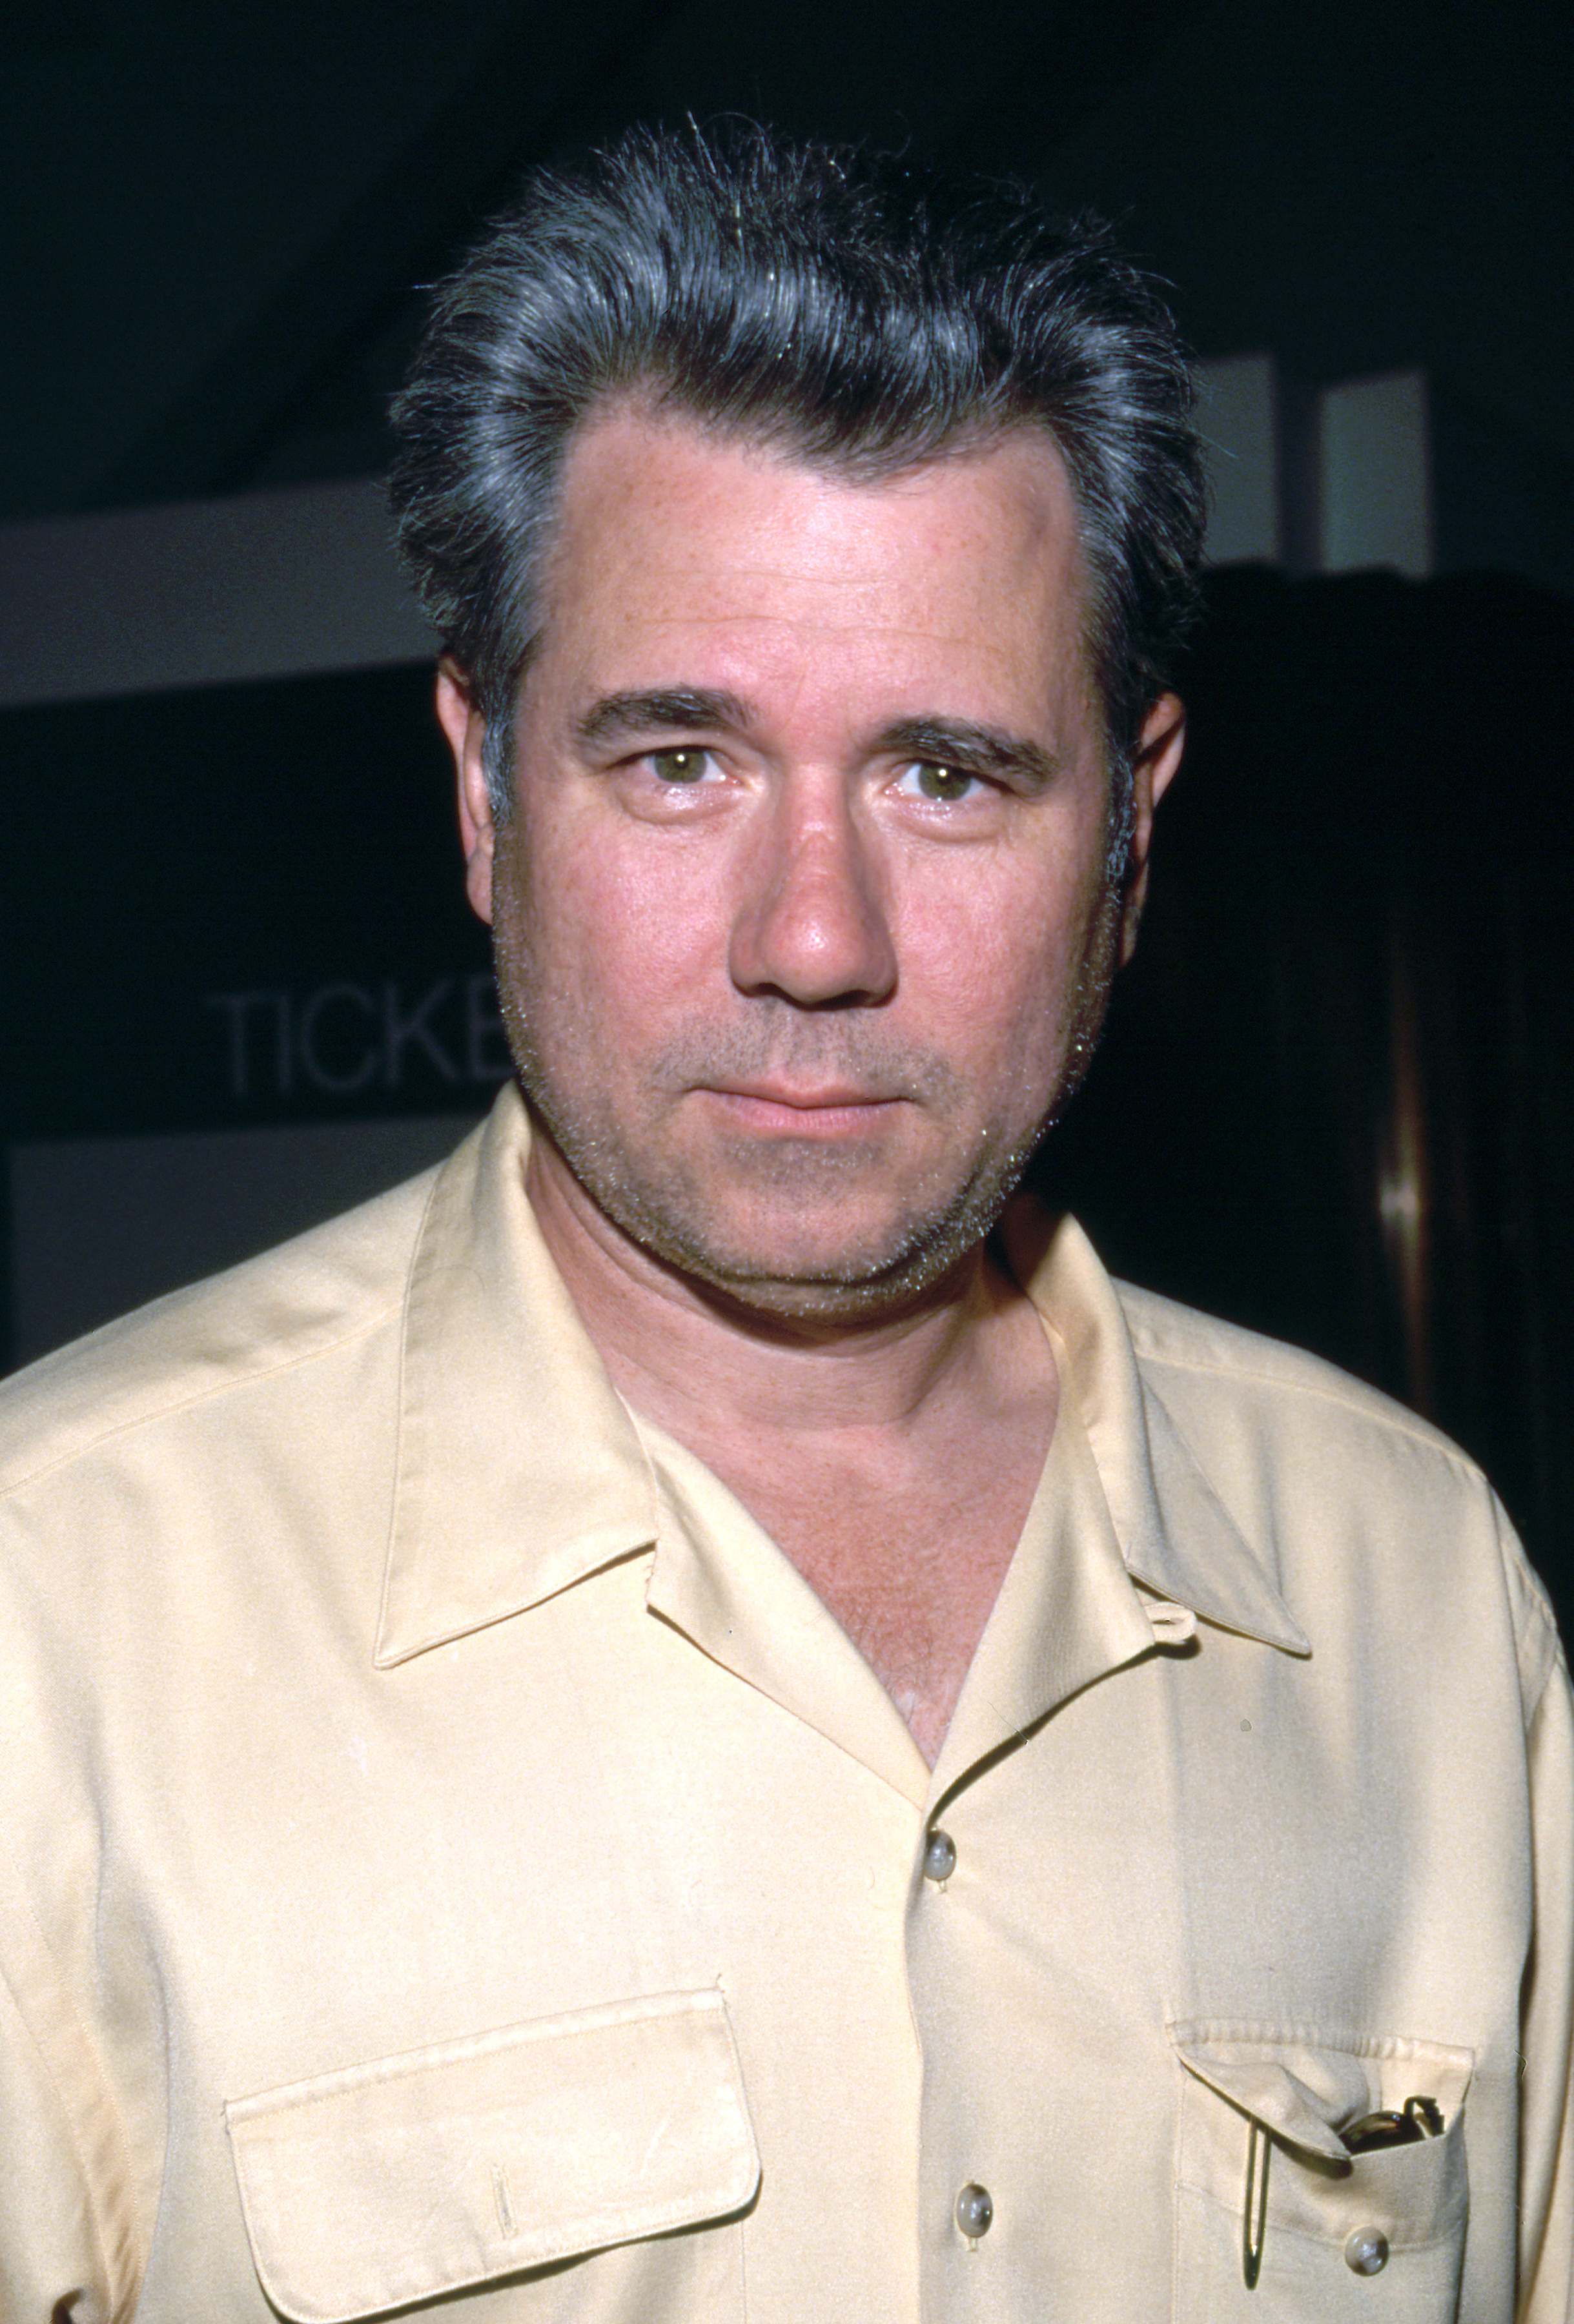 John Larroquette at the Women Helping Women event in 1991 in Los Angeles. | Source: Getty Images